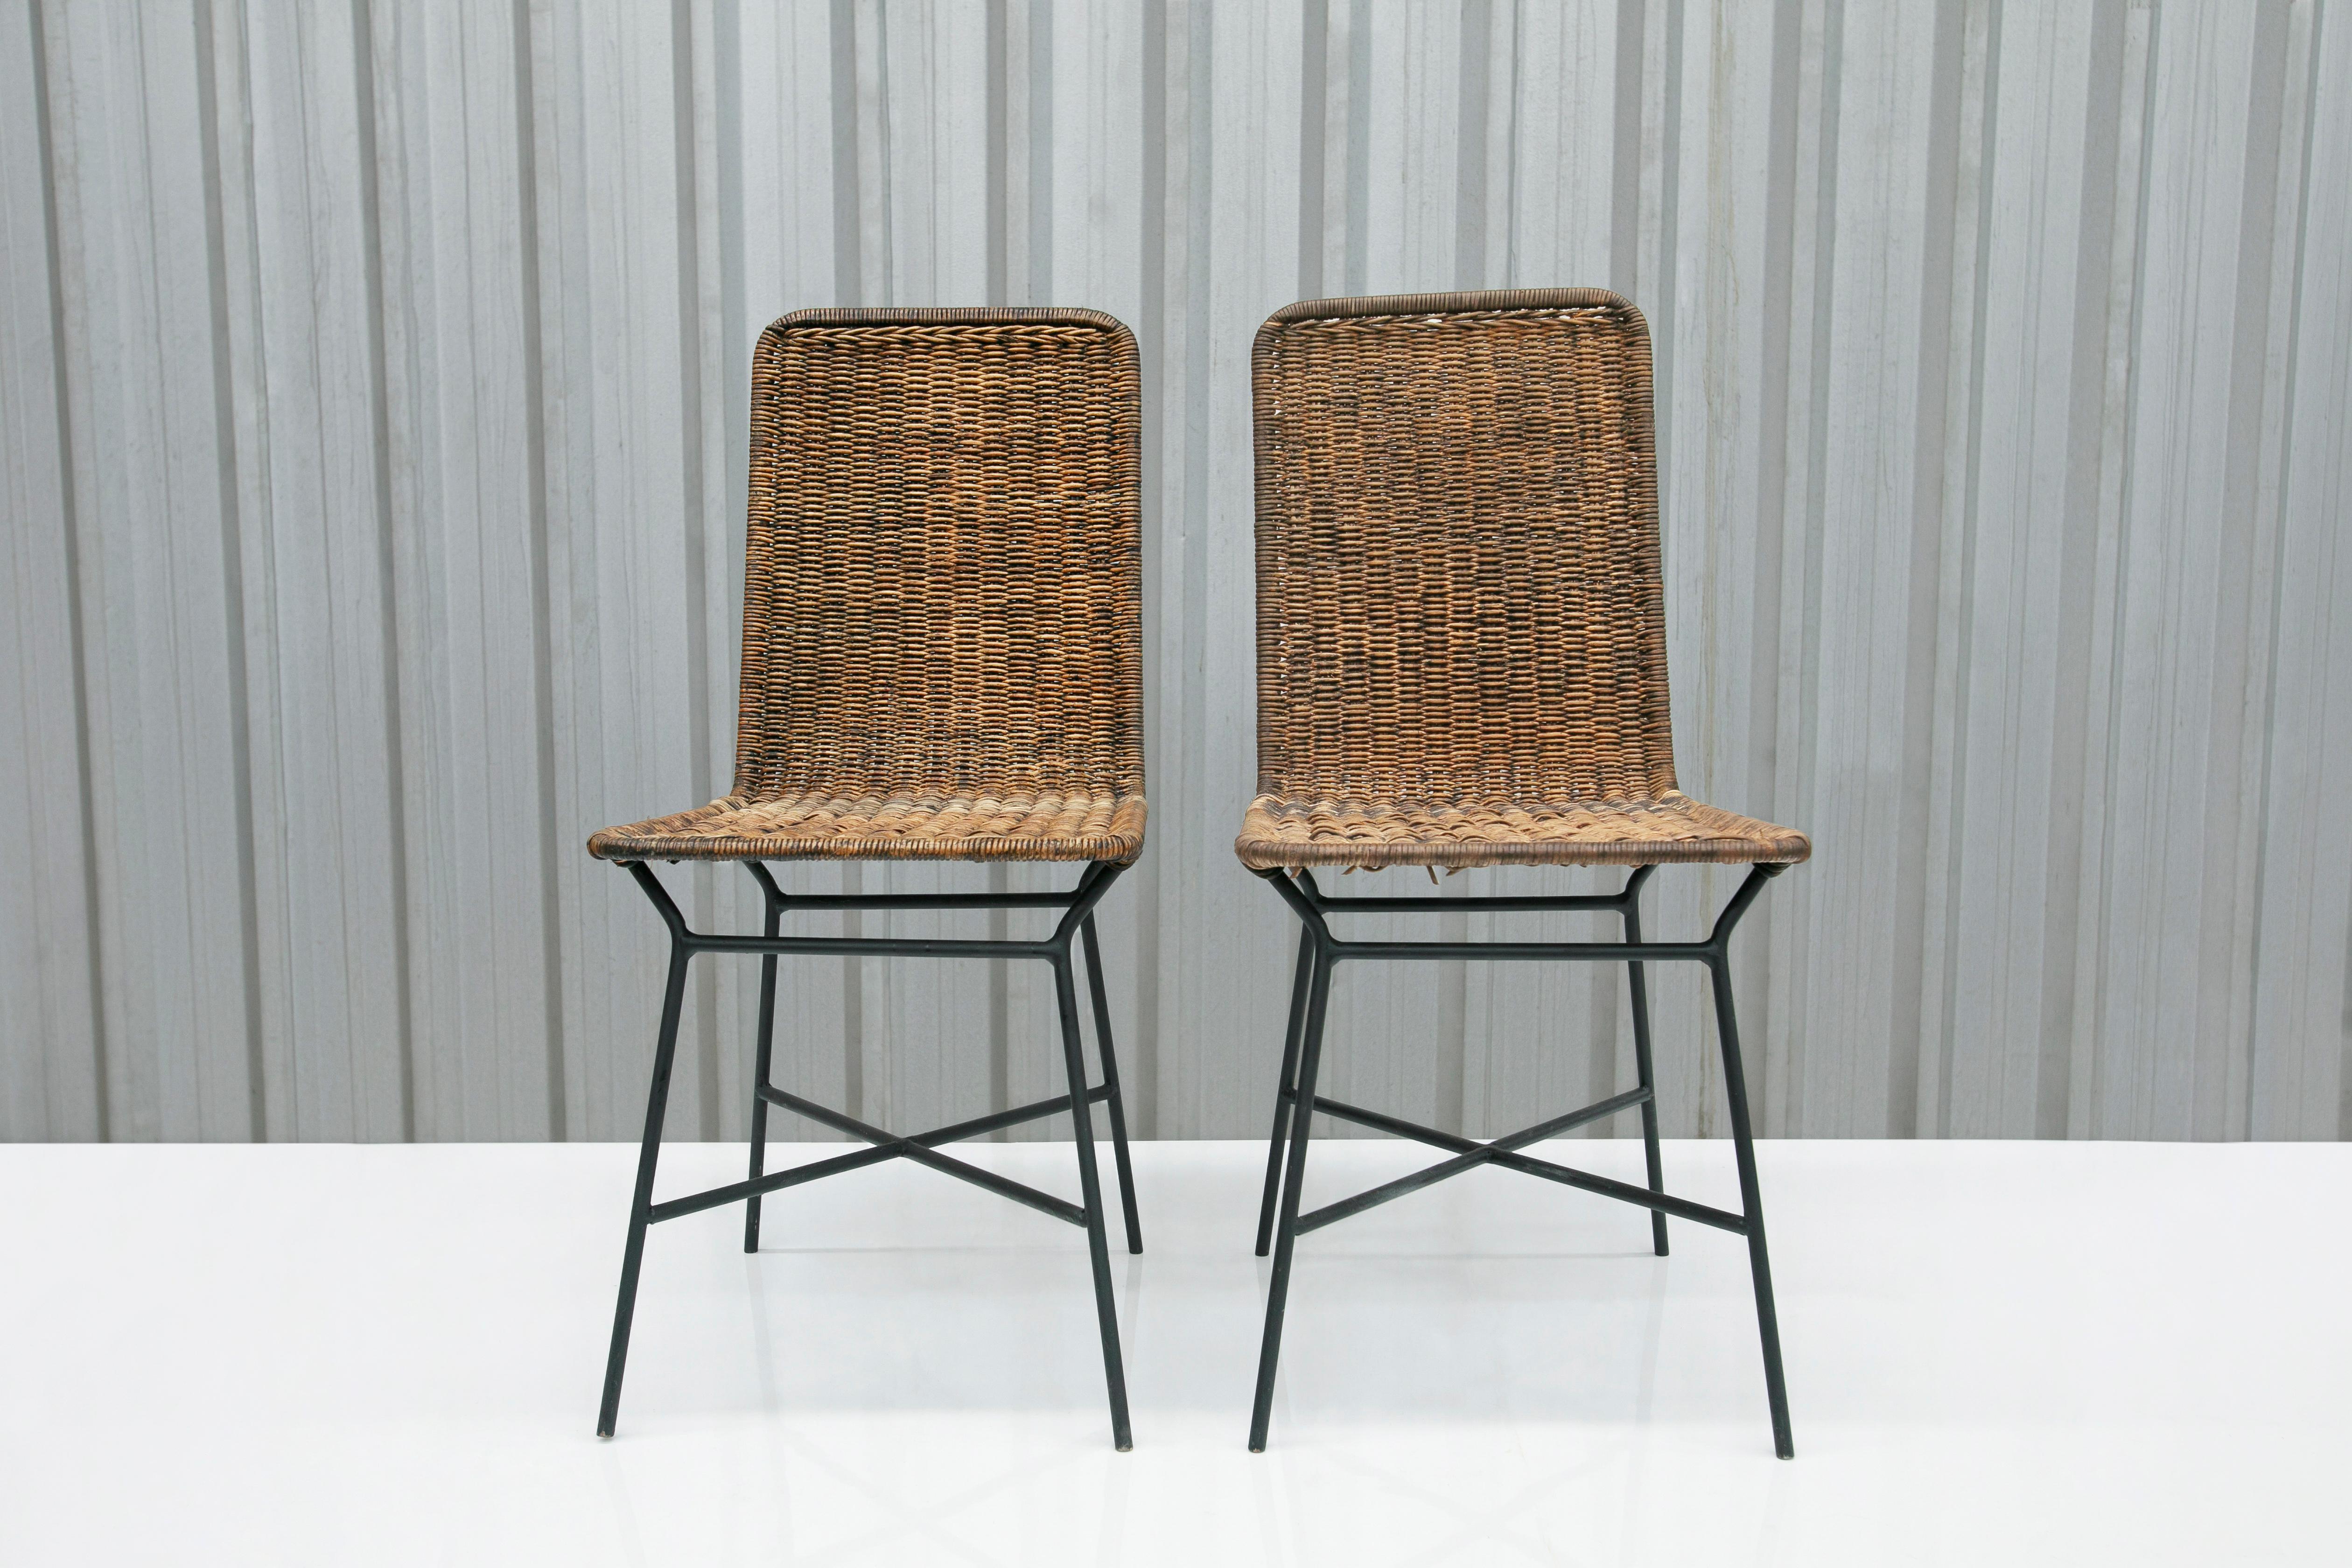 Available today, these Mid-Century Modern chairs in Caning and Metal designed by Carlo Hauner in the fifties are beautiful!!

The chairs feature an iron structure painted in black covered in caning. Attached an image showcasing one chair with a